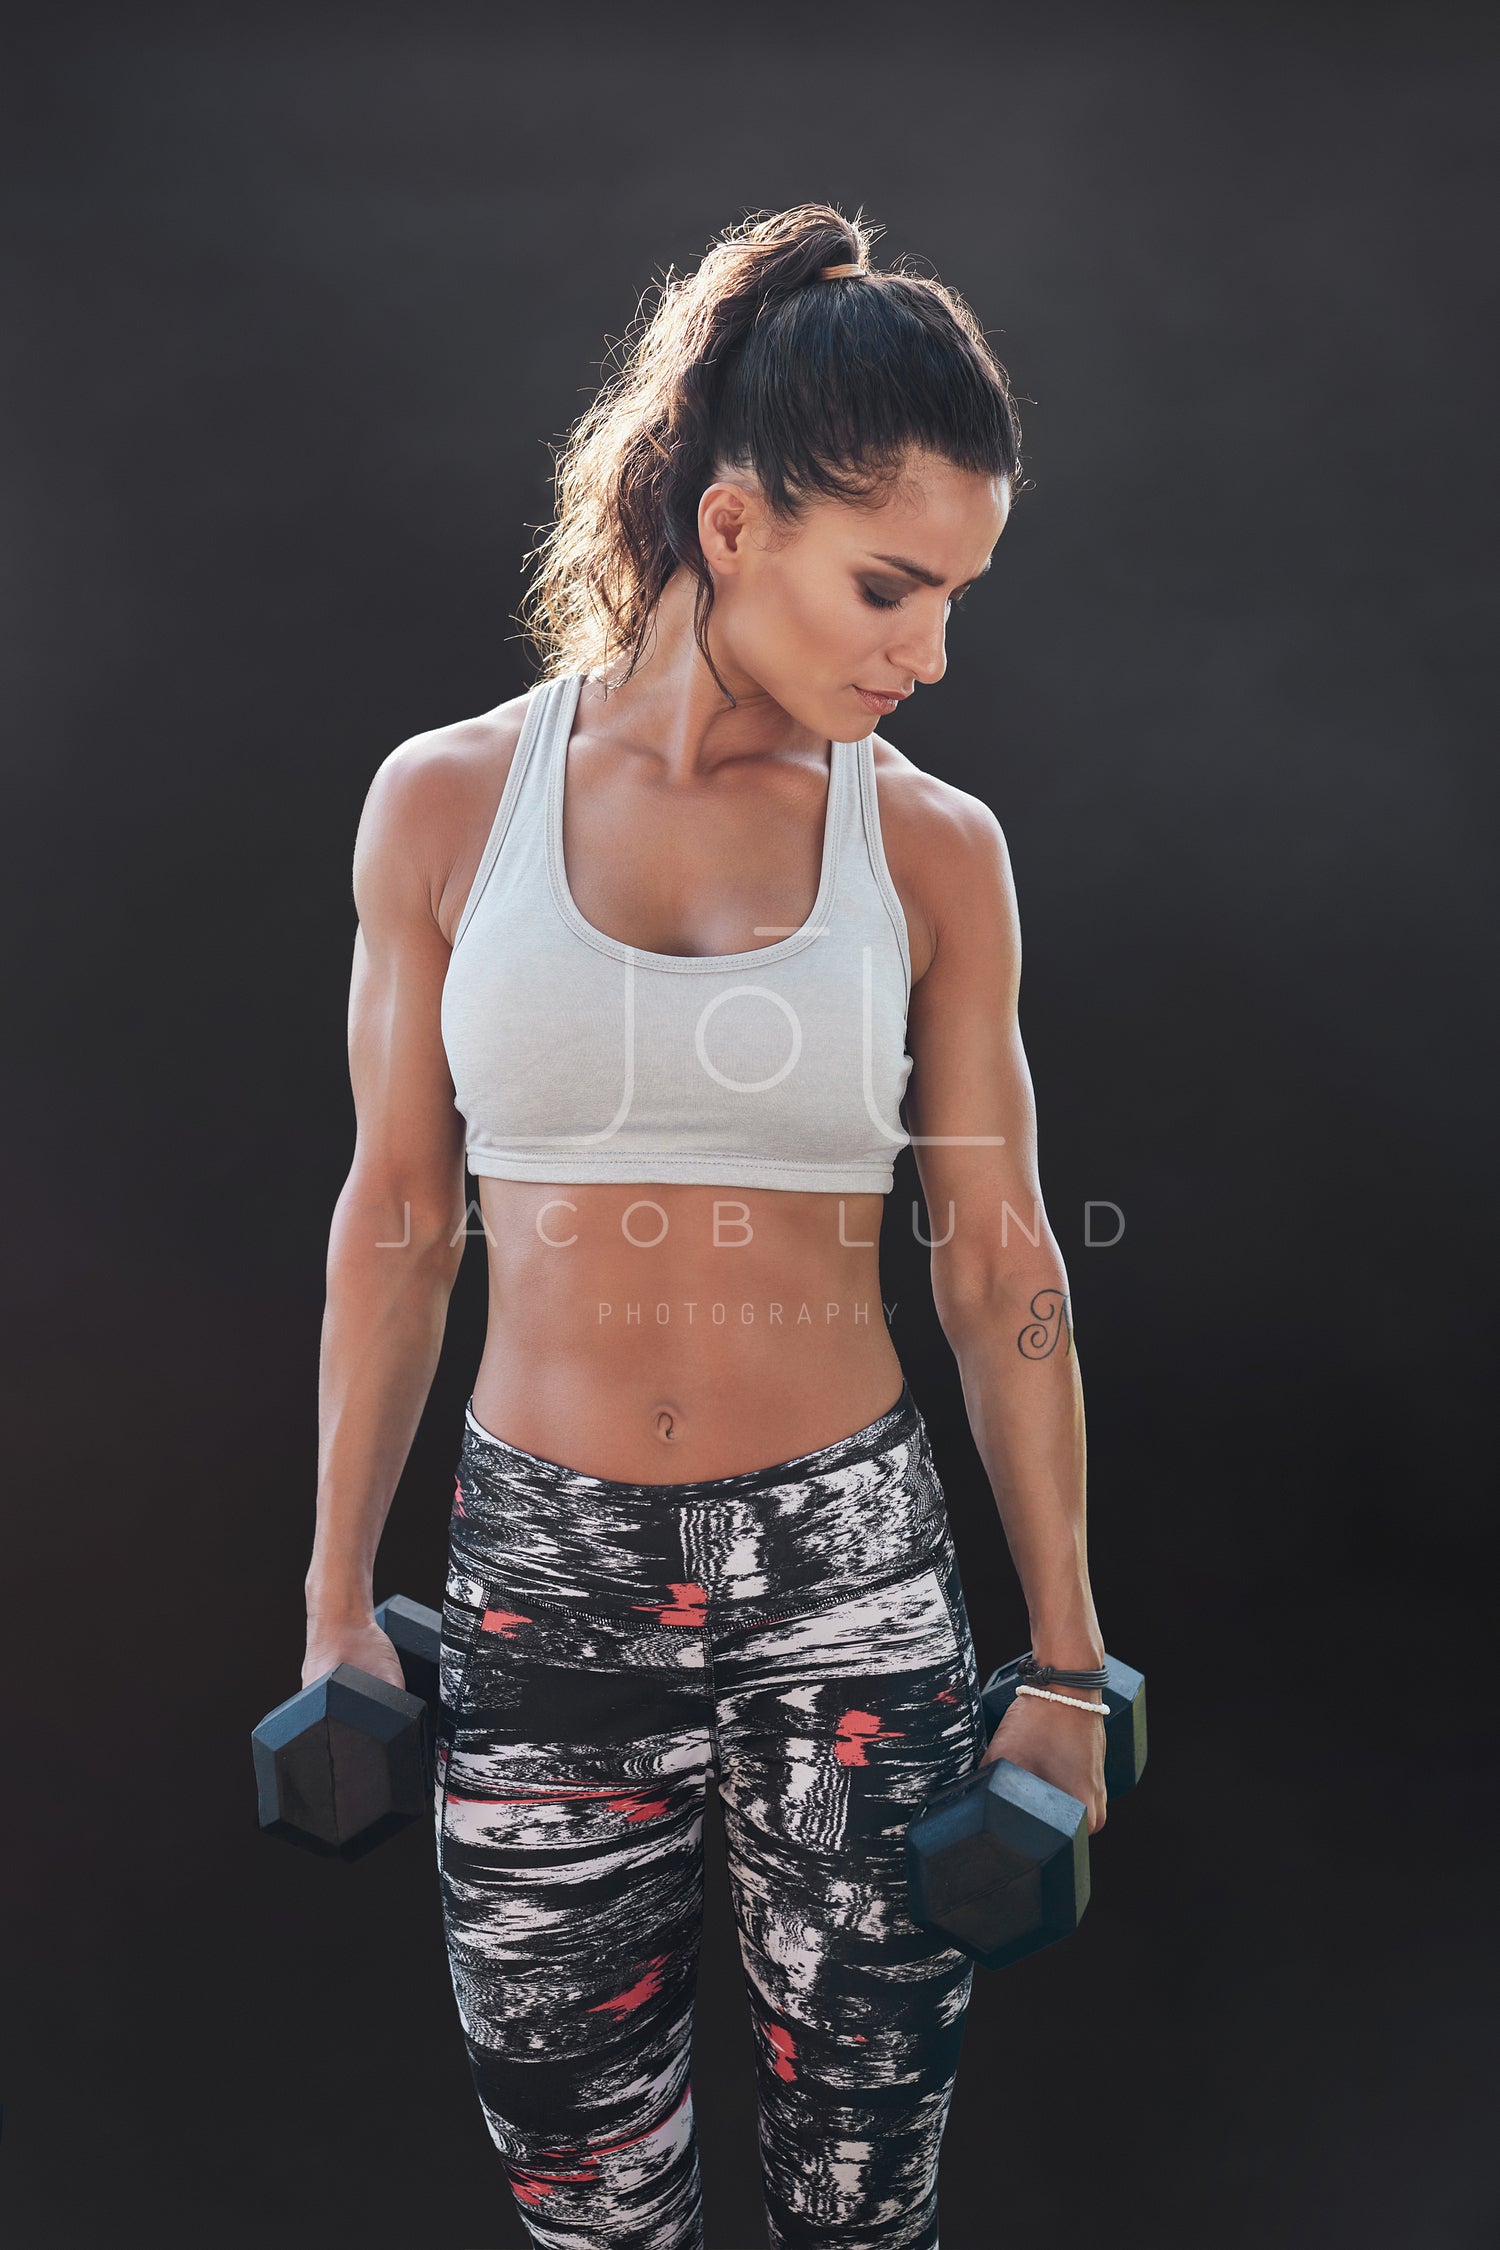 Fitness woman exercising with dumbbells – Jacob Lund Photography Store-  premium stock photo